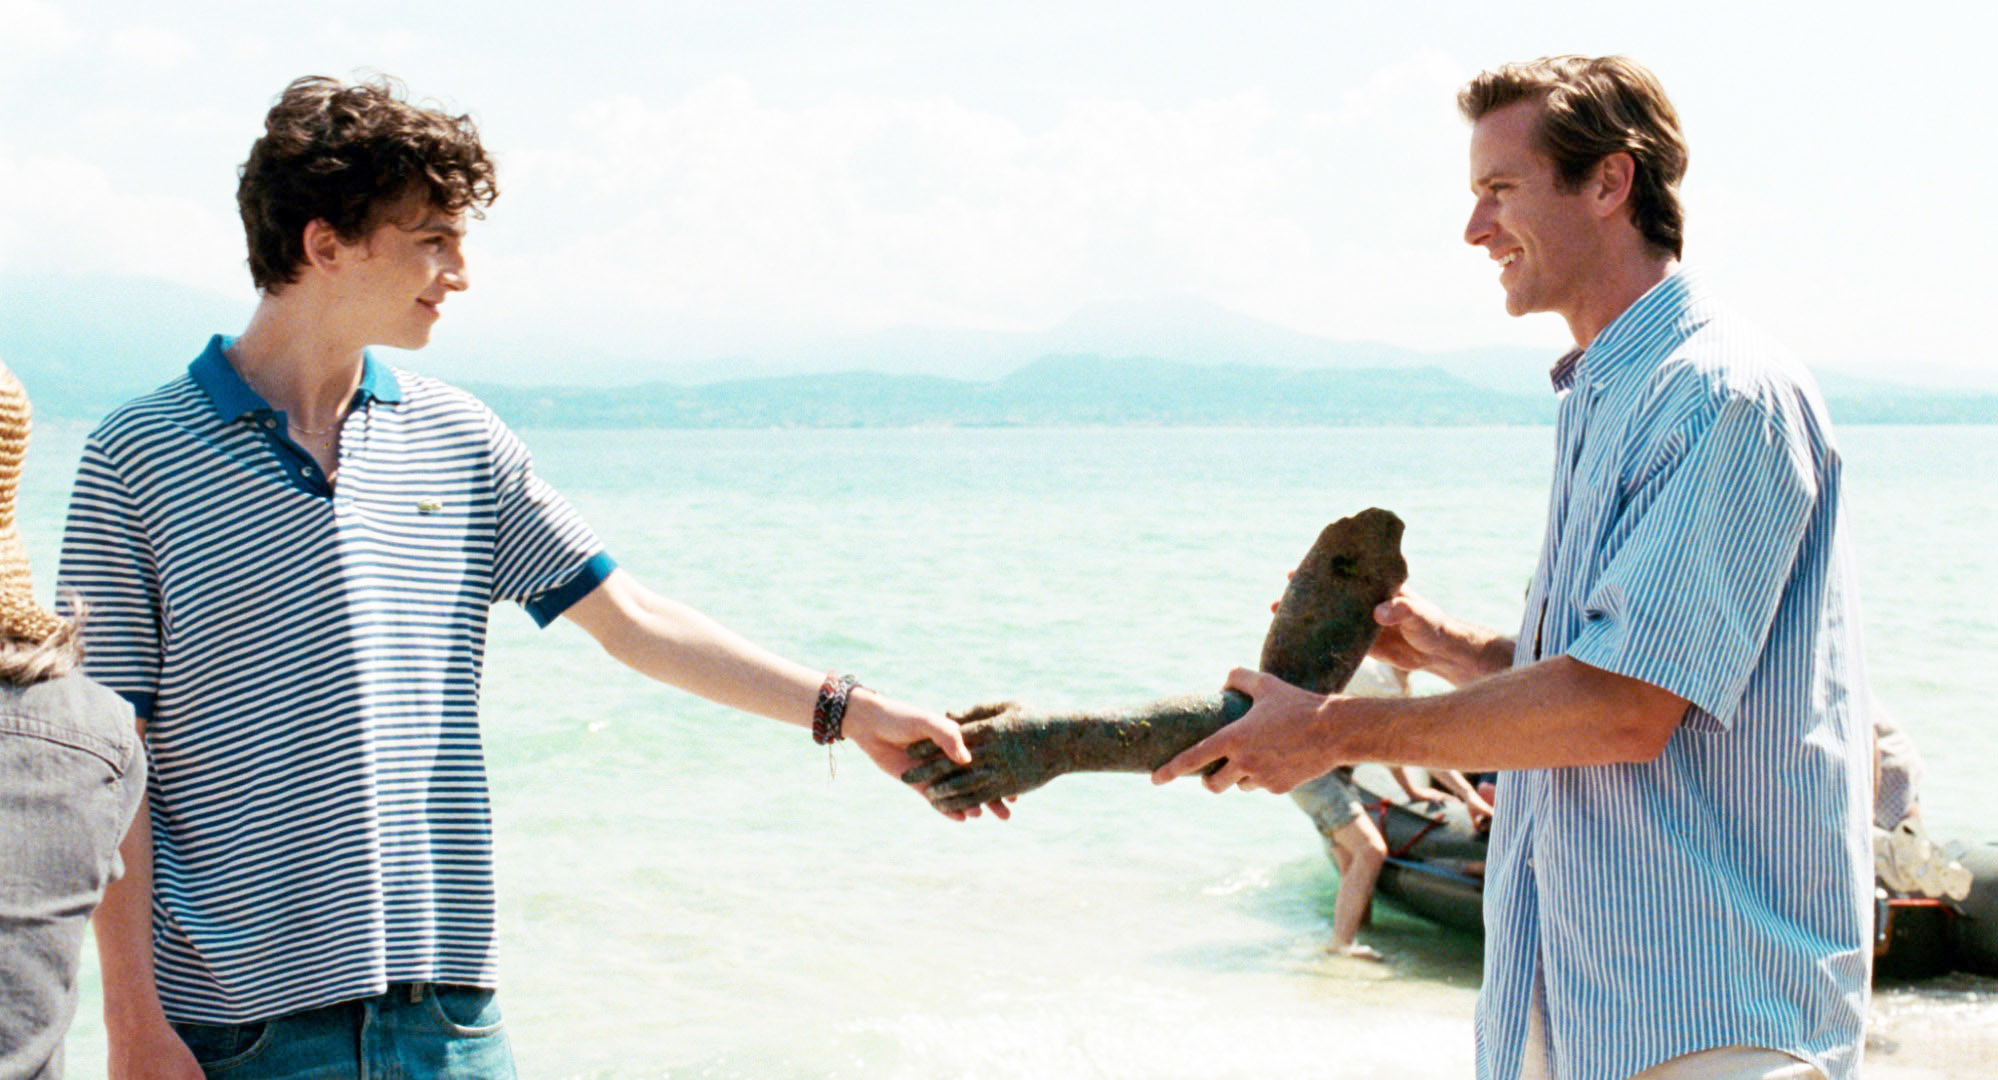 Timothée Chalamet and Armie Hammer look at each other as they hold a piece of driftwood